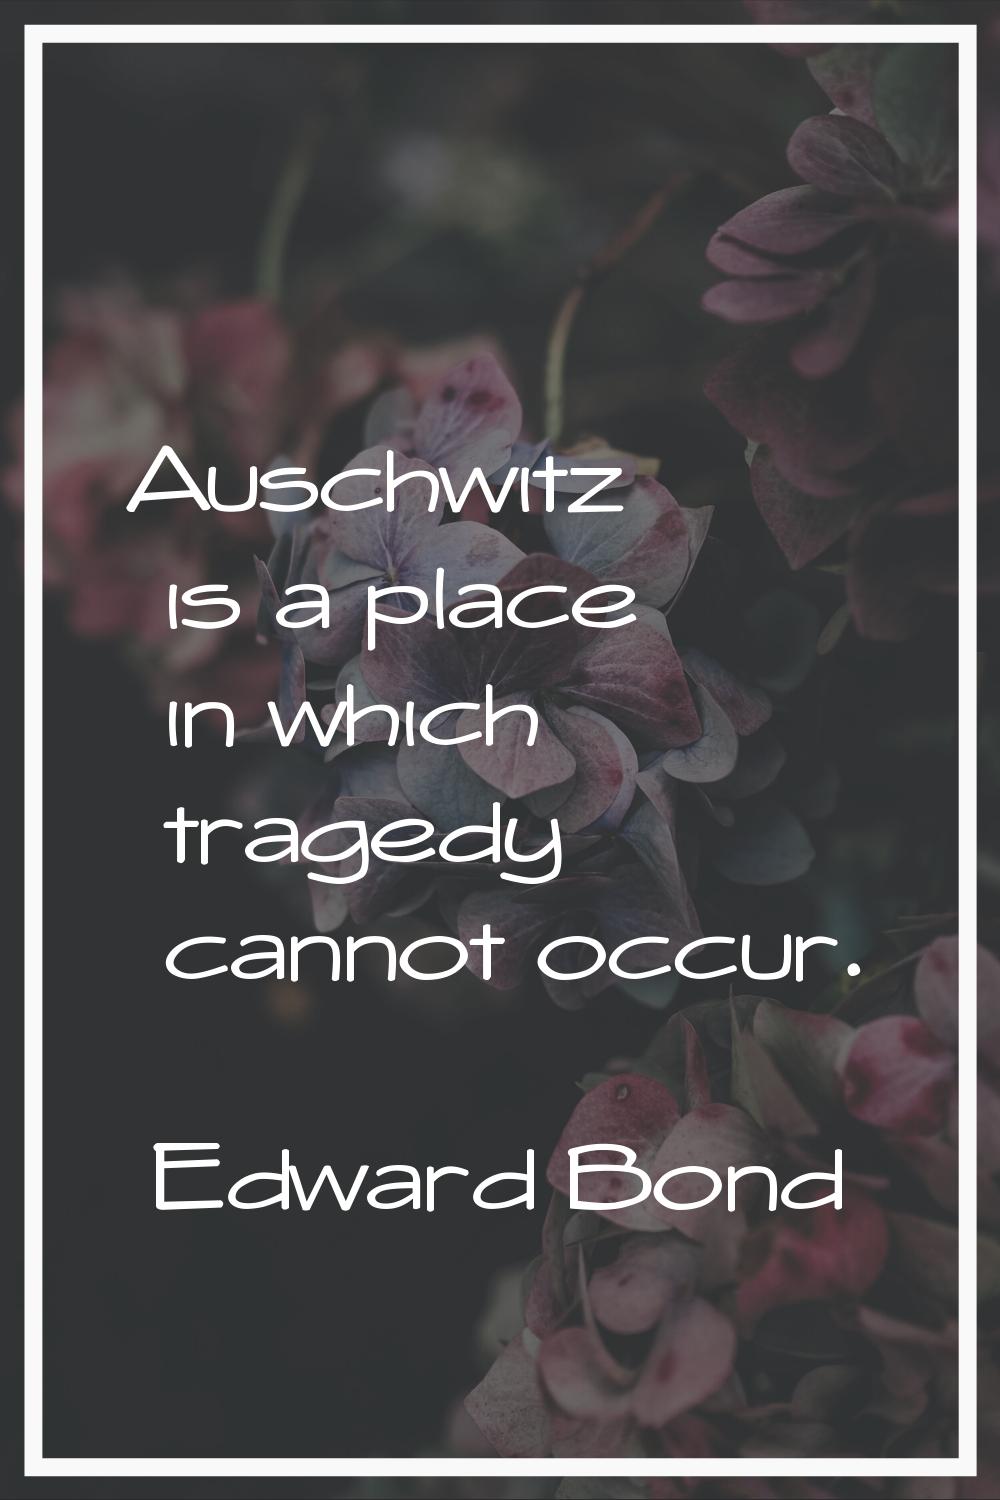 Auschwitz is a place in which tragedy cannot occur.